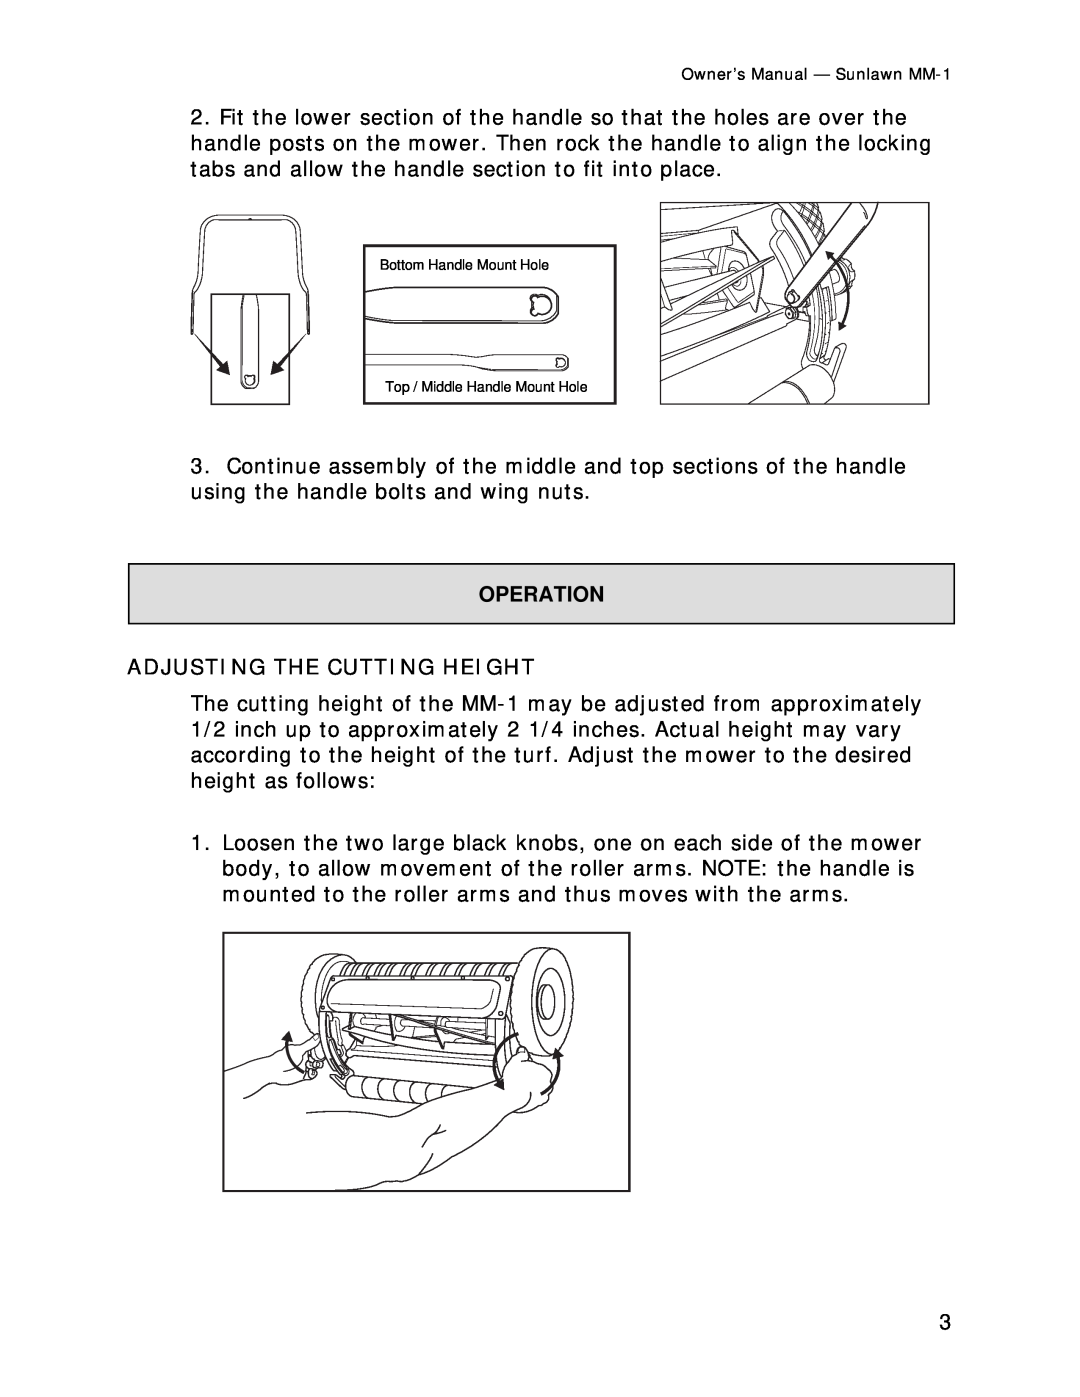 Reel Mowers, Etc MM-1 owner manual Adjusting The Cutting Height, Operation 